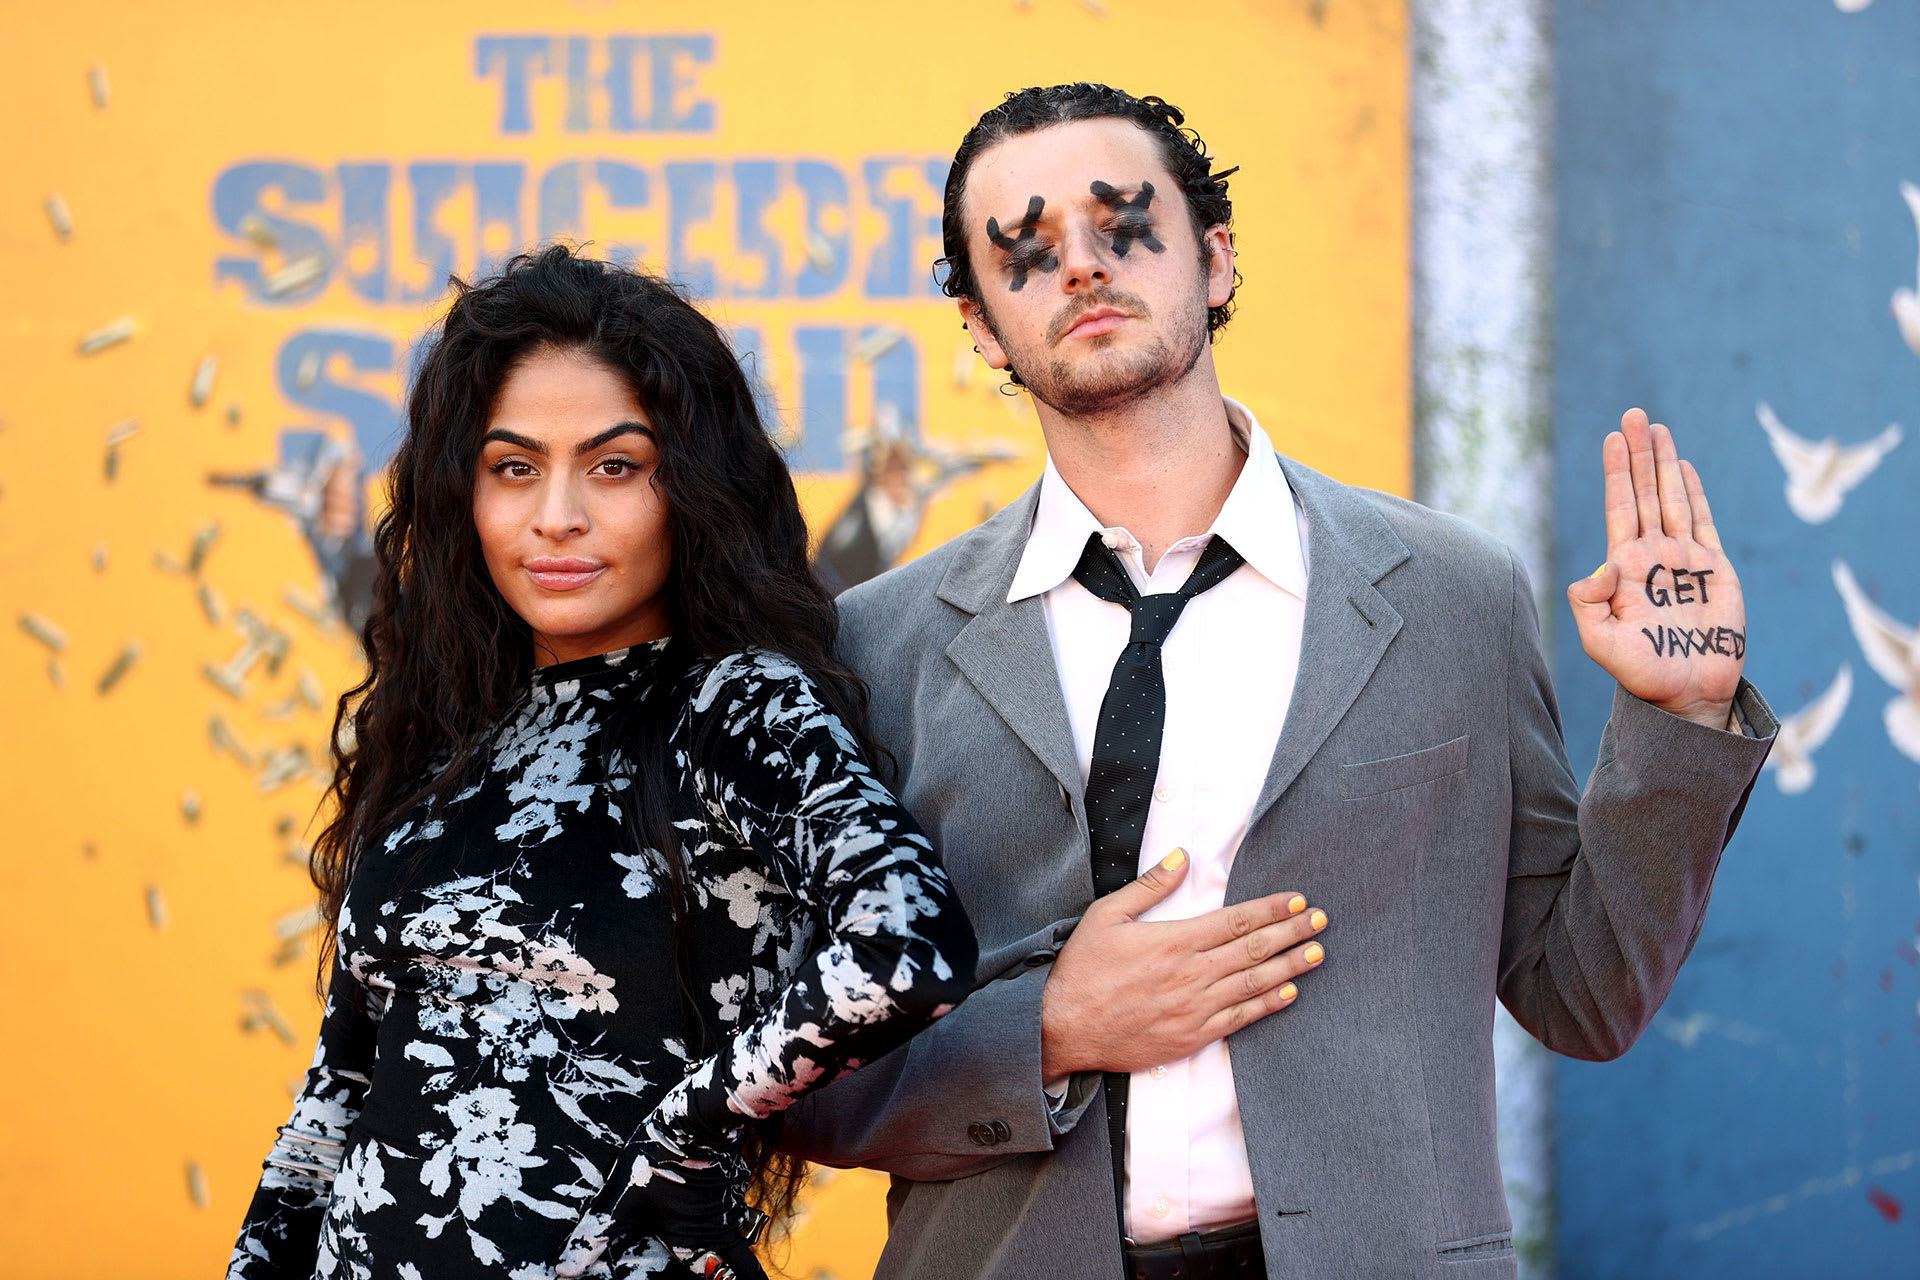 Jessie Reyez and Grandson at the premiere of &#x27;The Suicide Squad&#x27;